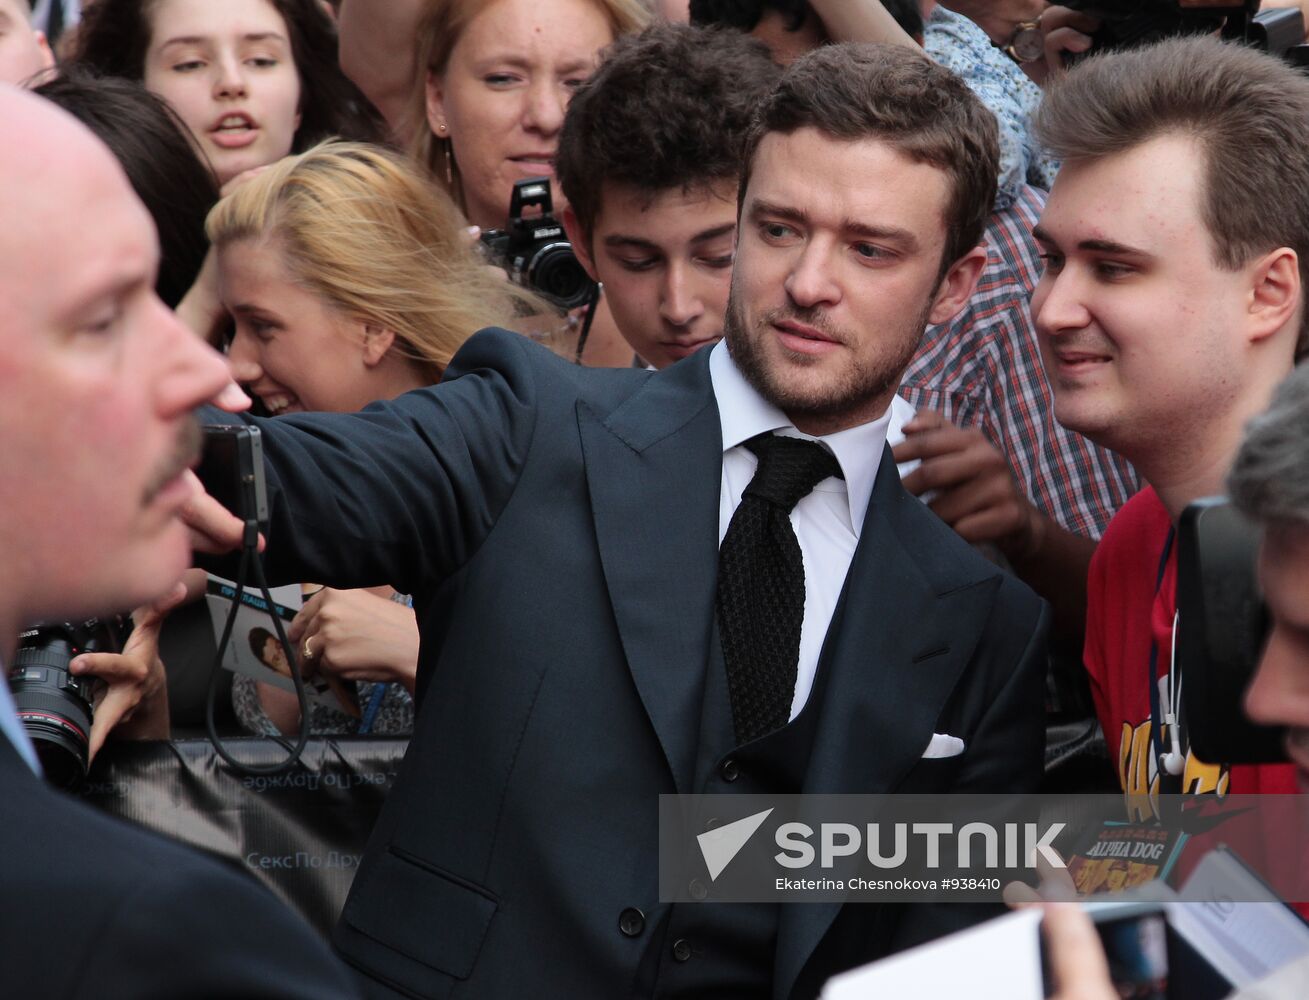 "Friends with Benefits" movie premiered in Moscow